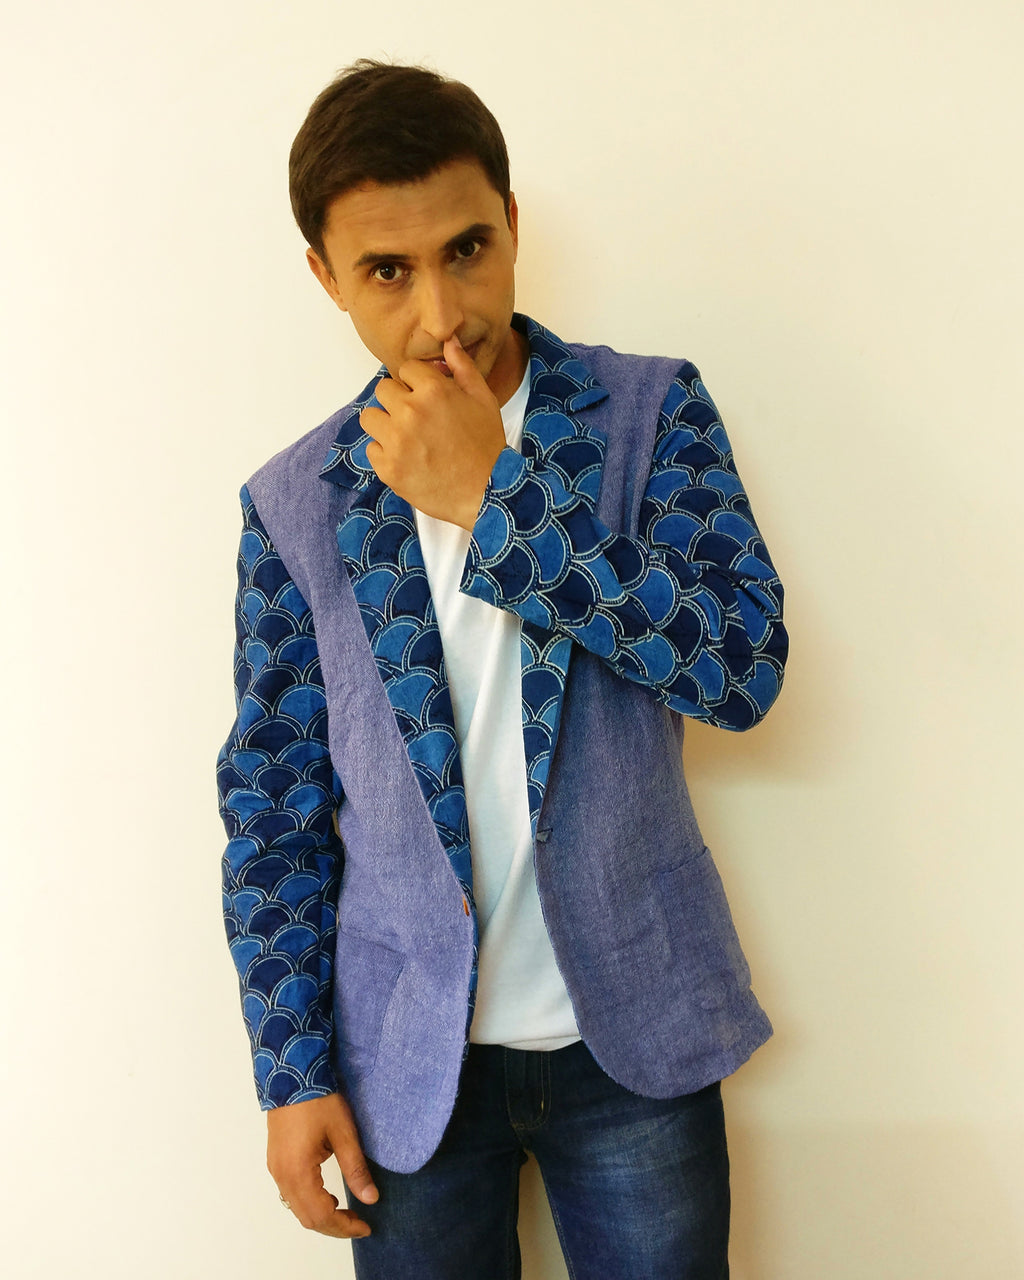 Blazer jacket with cotton, linen & jute mix fabric for men. Great for summer and humid seasons. Very versatile denim-ish colour. Shop online!